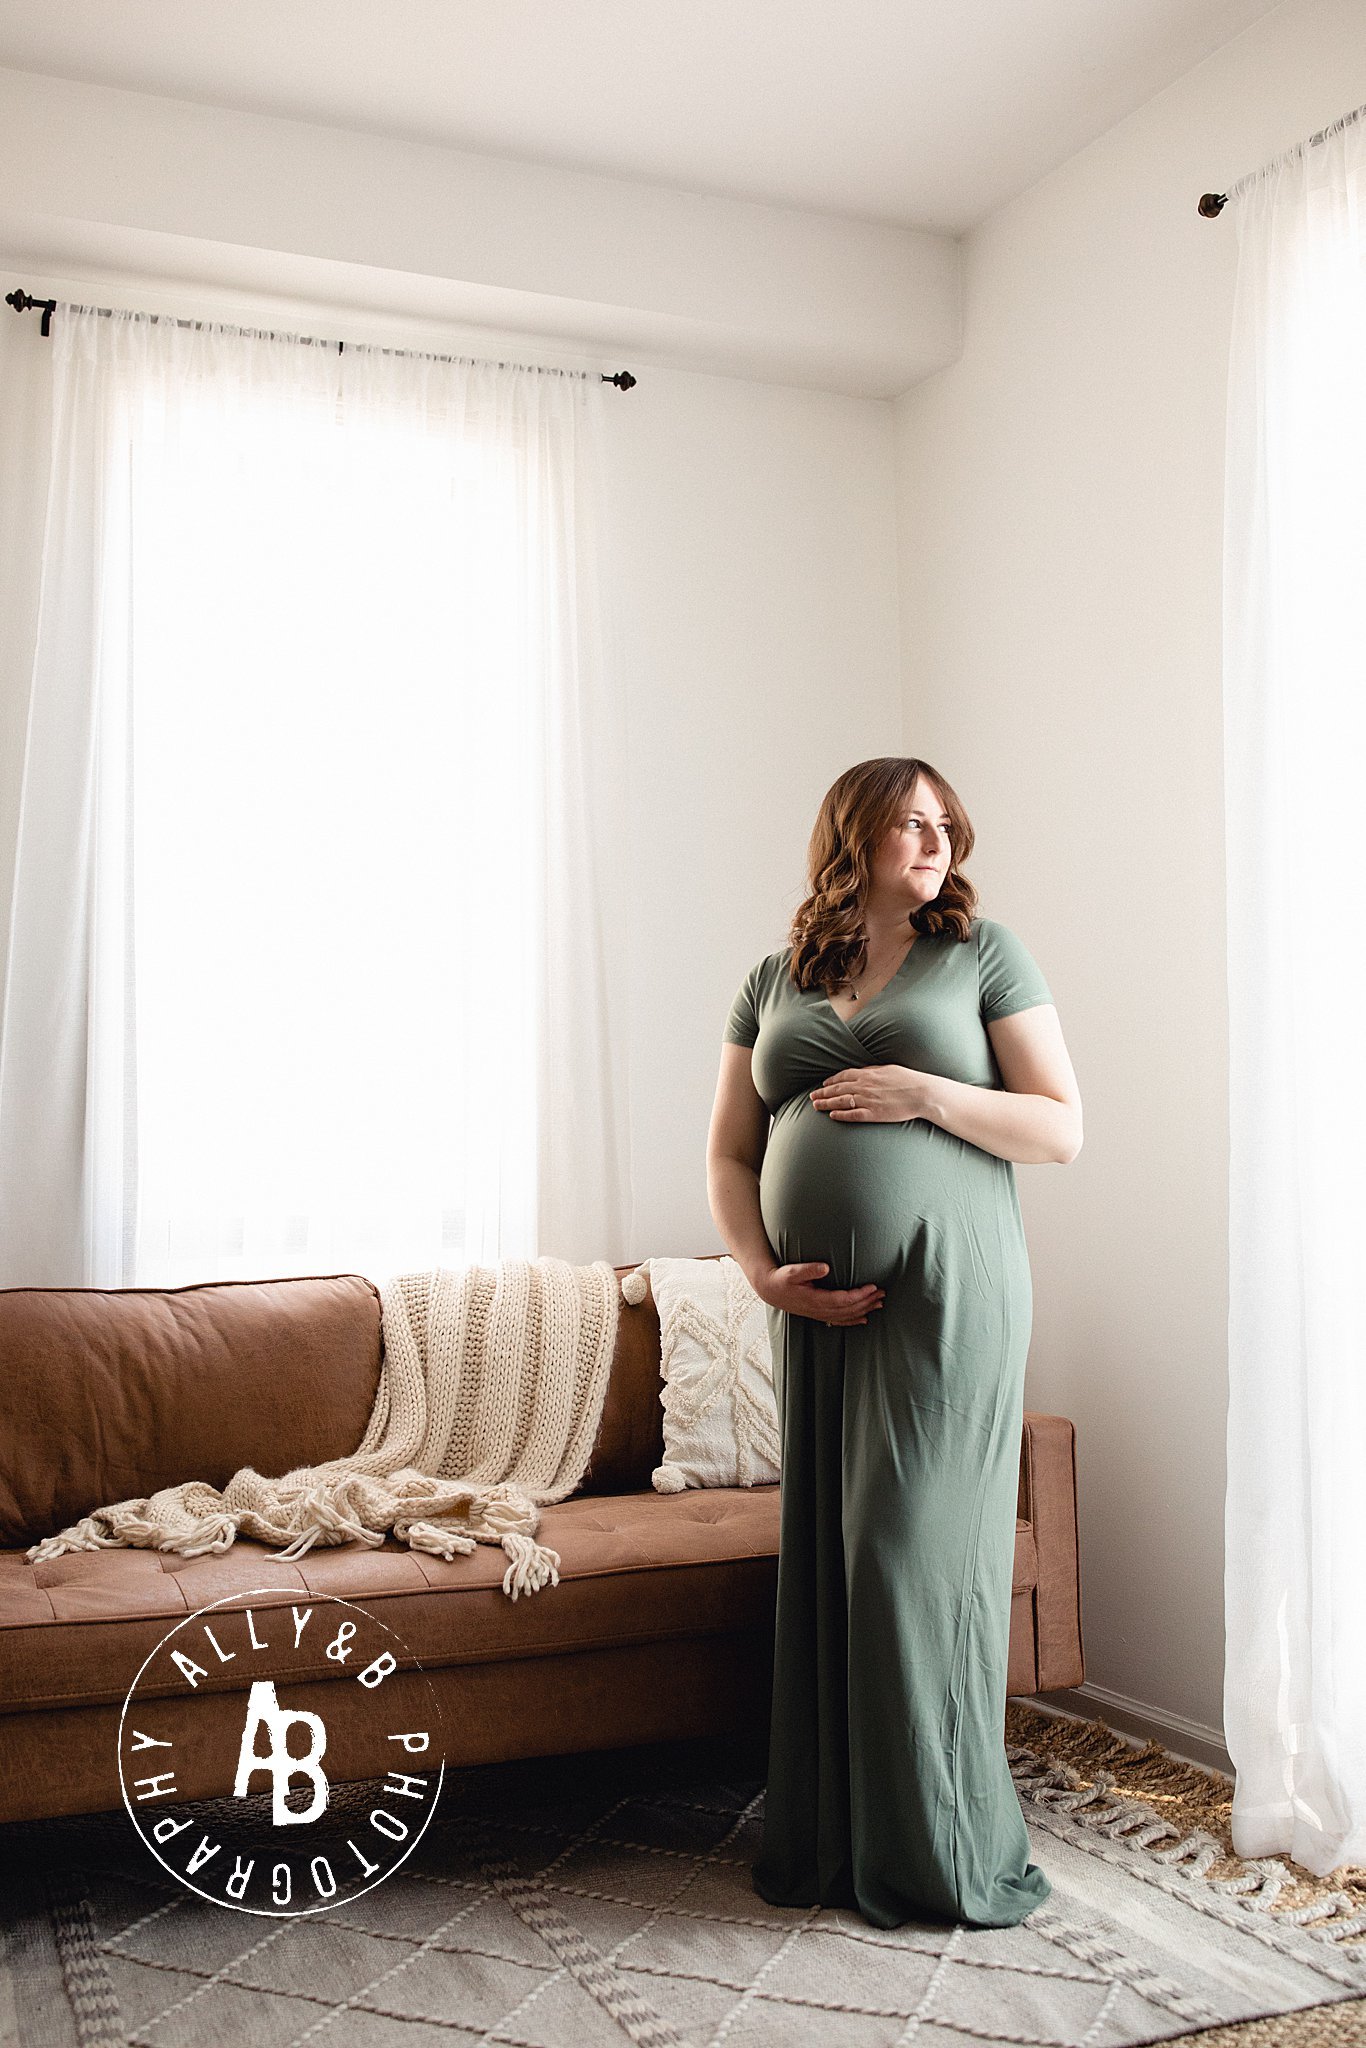 maternity photographers in naperville il.jpg